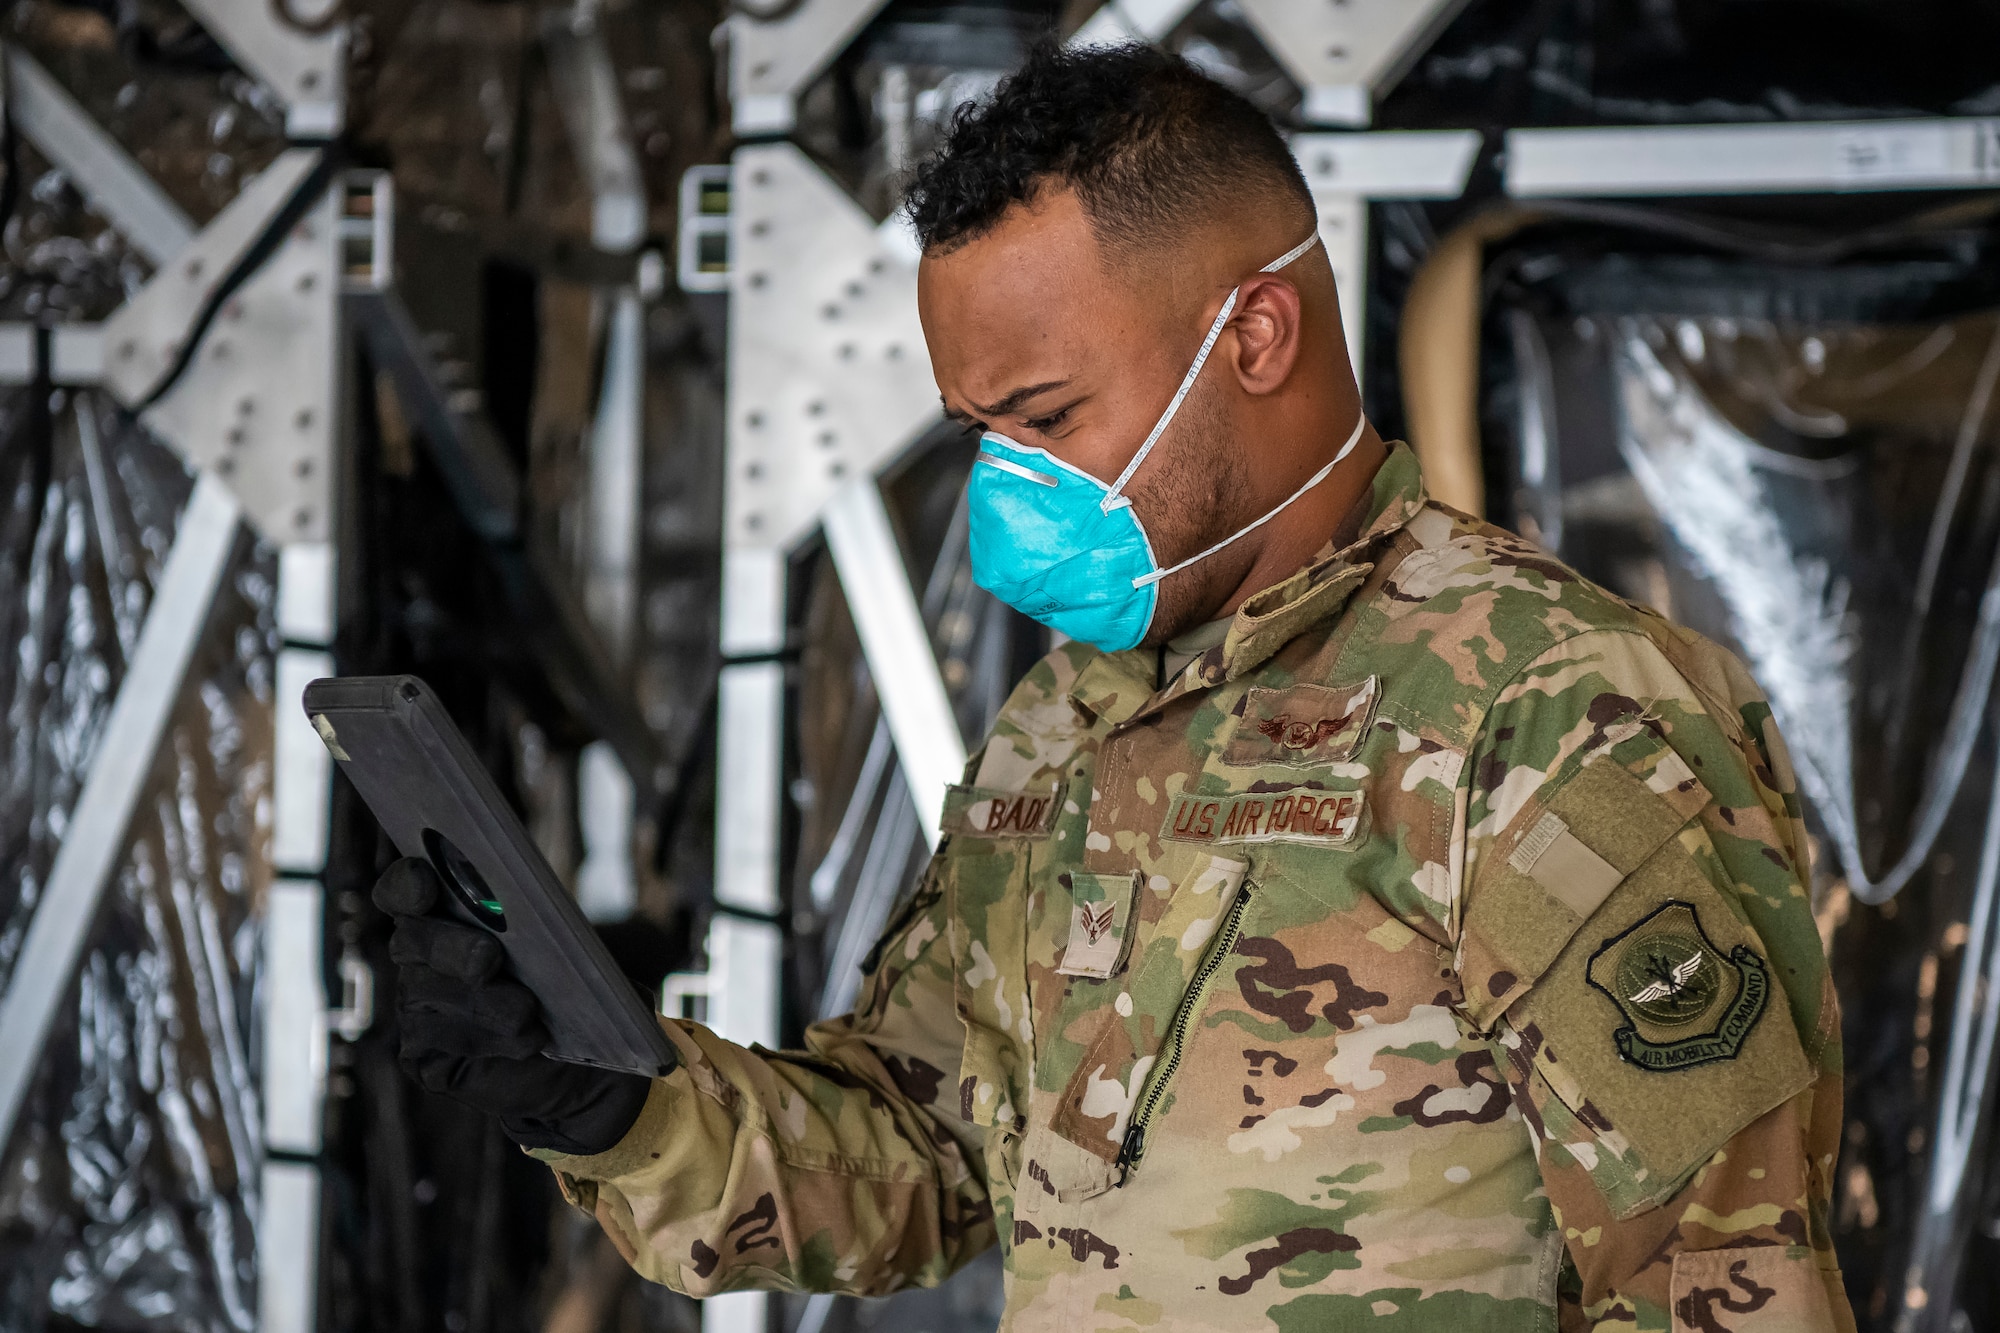 Senior Airman Jashield Blades, 16th Airlift Squadron loadmaster, reviews a checklist at Dover Air Force Base, Delaware, April 30, 2020. Two Transport Isolation Systems were delivered to Dover AFB by a C-17 Globemaster III from Joint Base Charleston, South Carolina. In accordance with health protection policies, Dover AFB will serve as the sole hub for TIS decontamination on the East Coast. (U.S. Air Force photo by Senior Airman Christopher Quail)